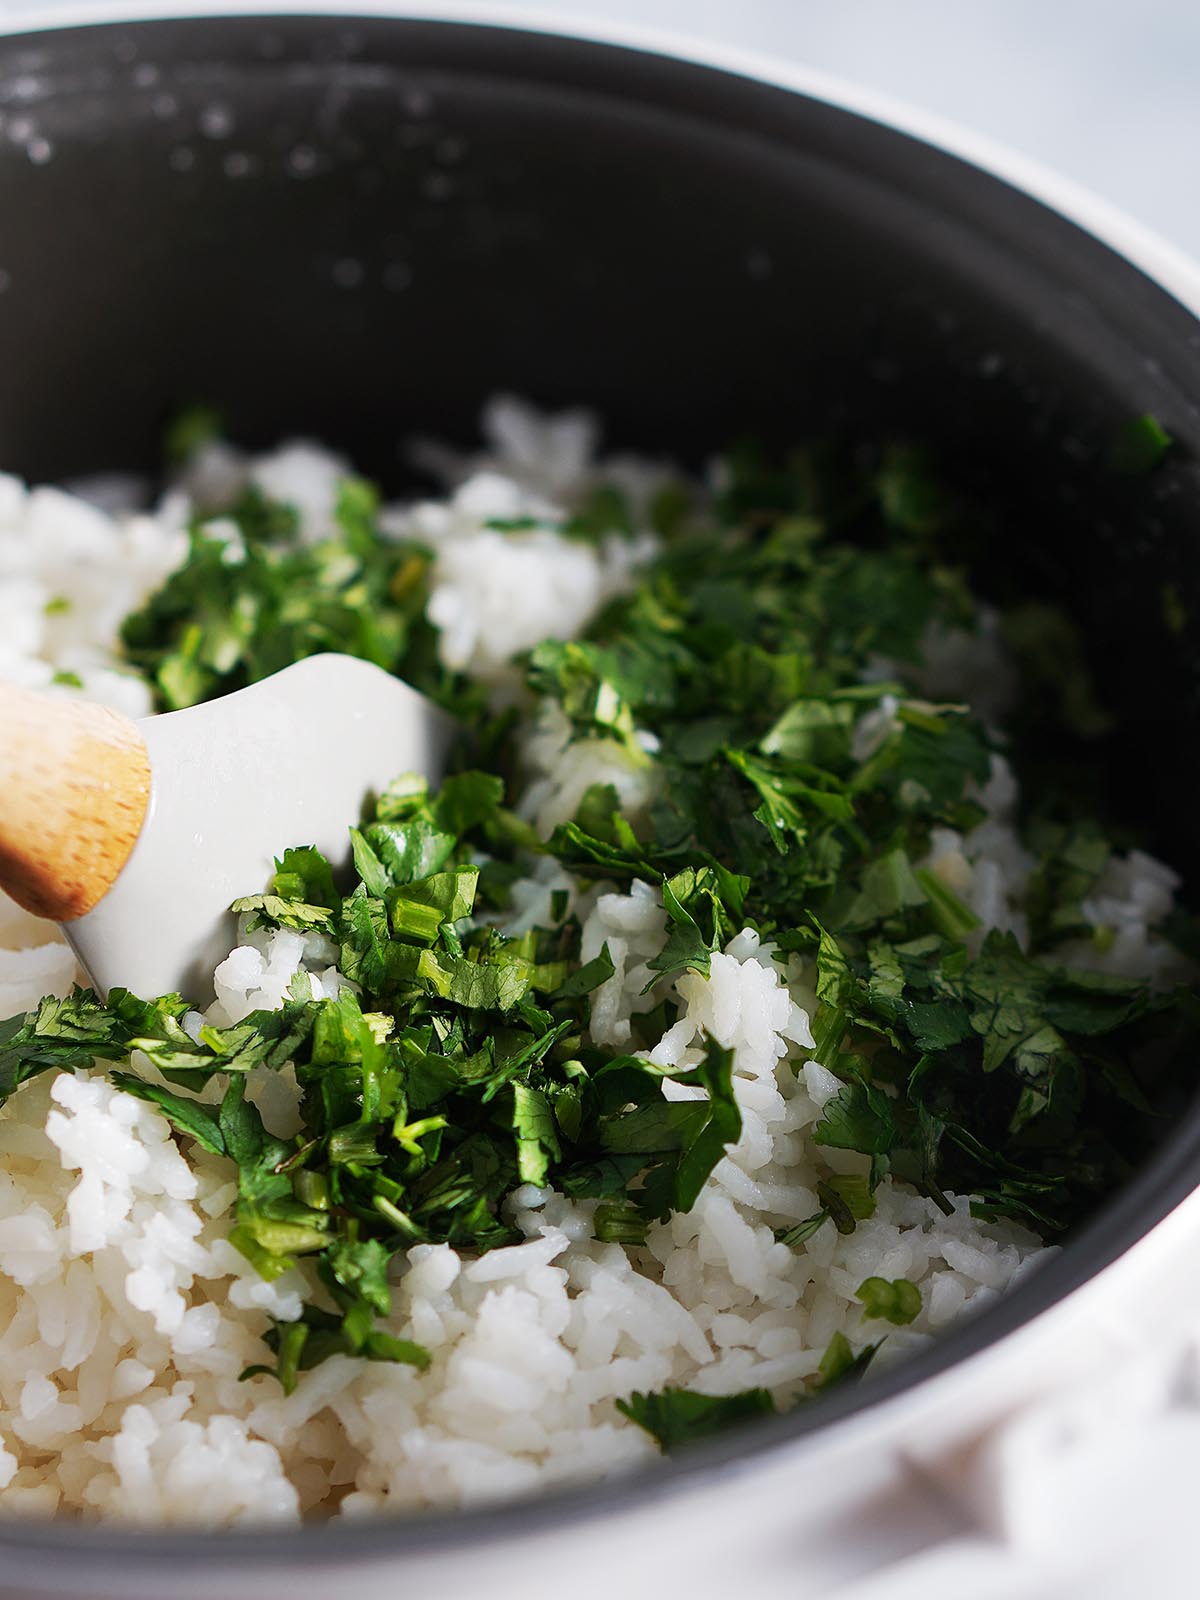 Mixing chopped cilantro into cooked white rice.